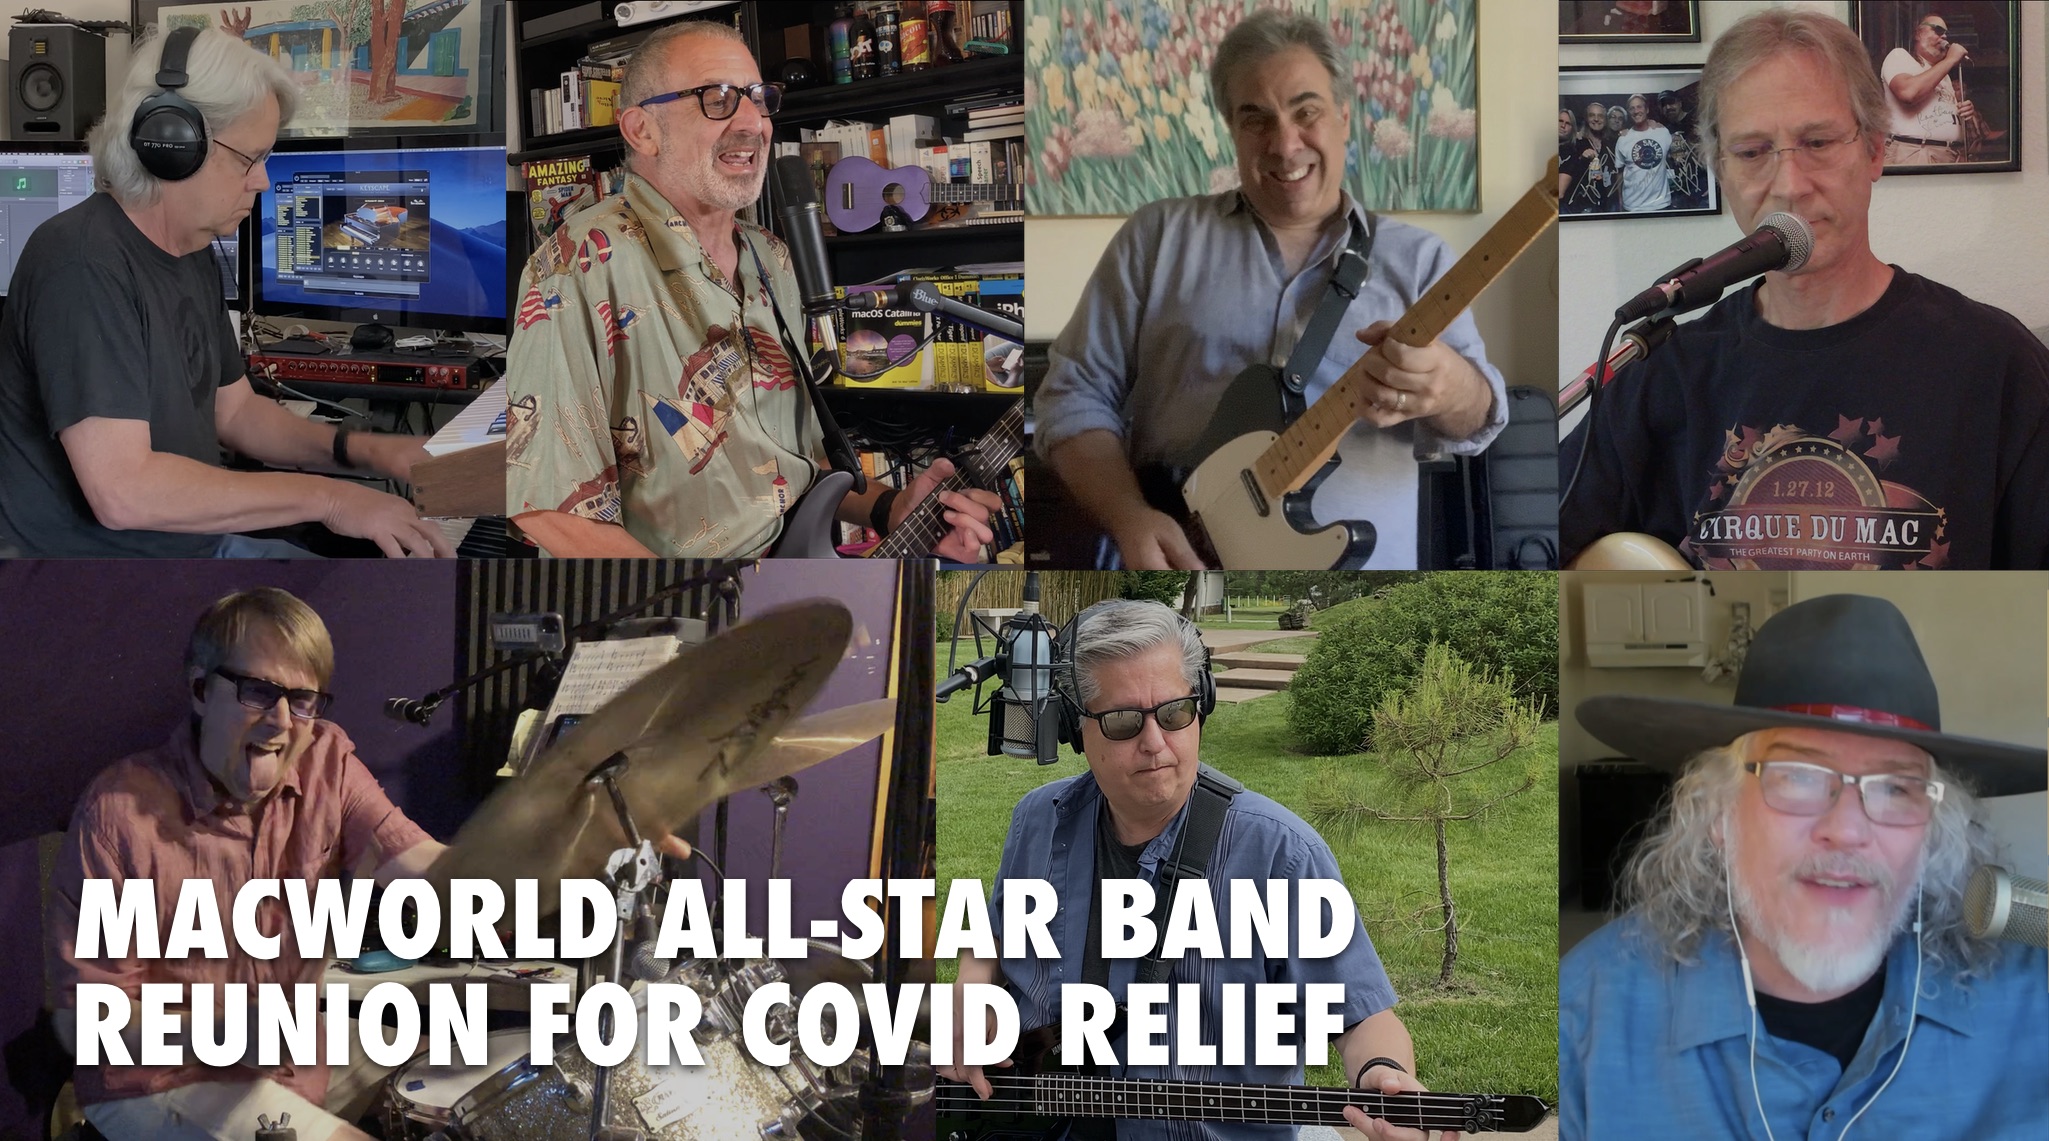 Thumbnails of the Macworld All-Star Band, reuniting during the pandemic